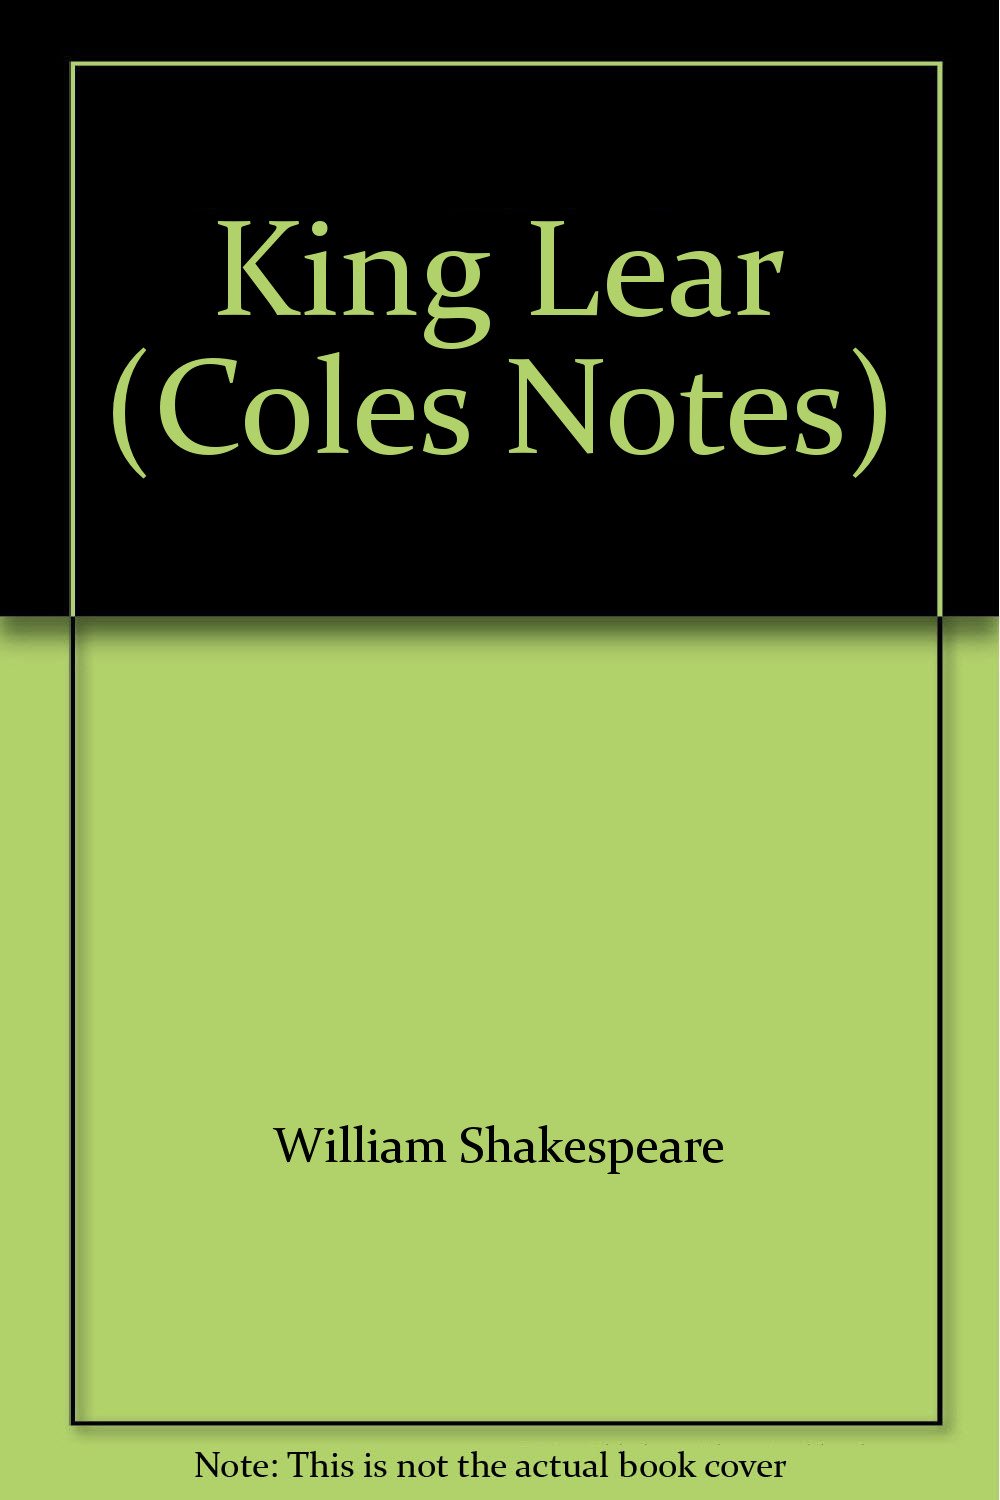 Coles Notes William Shakespeare  Macmillan Master Guides:King Lear